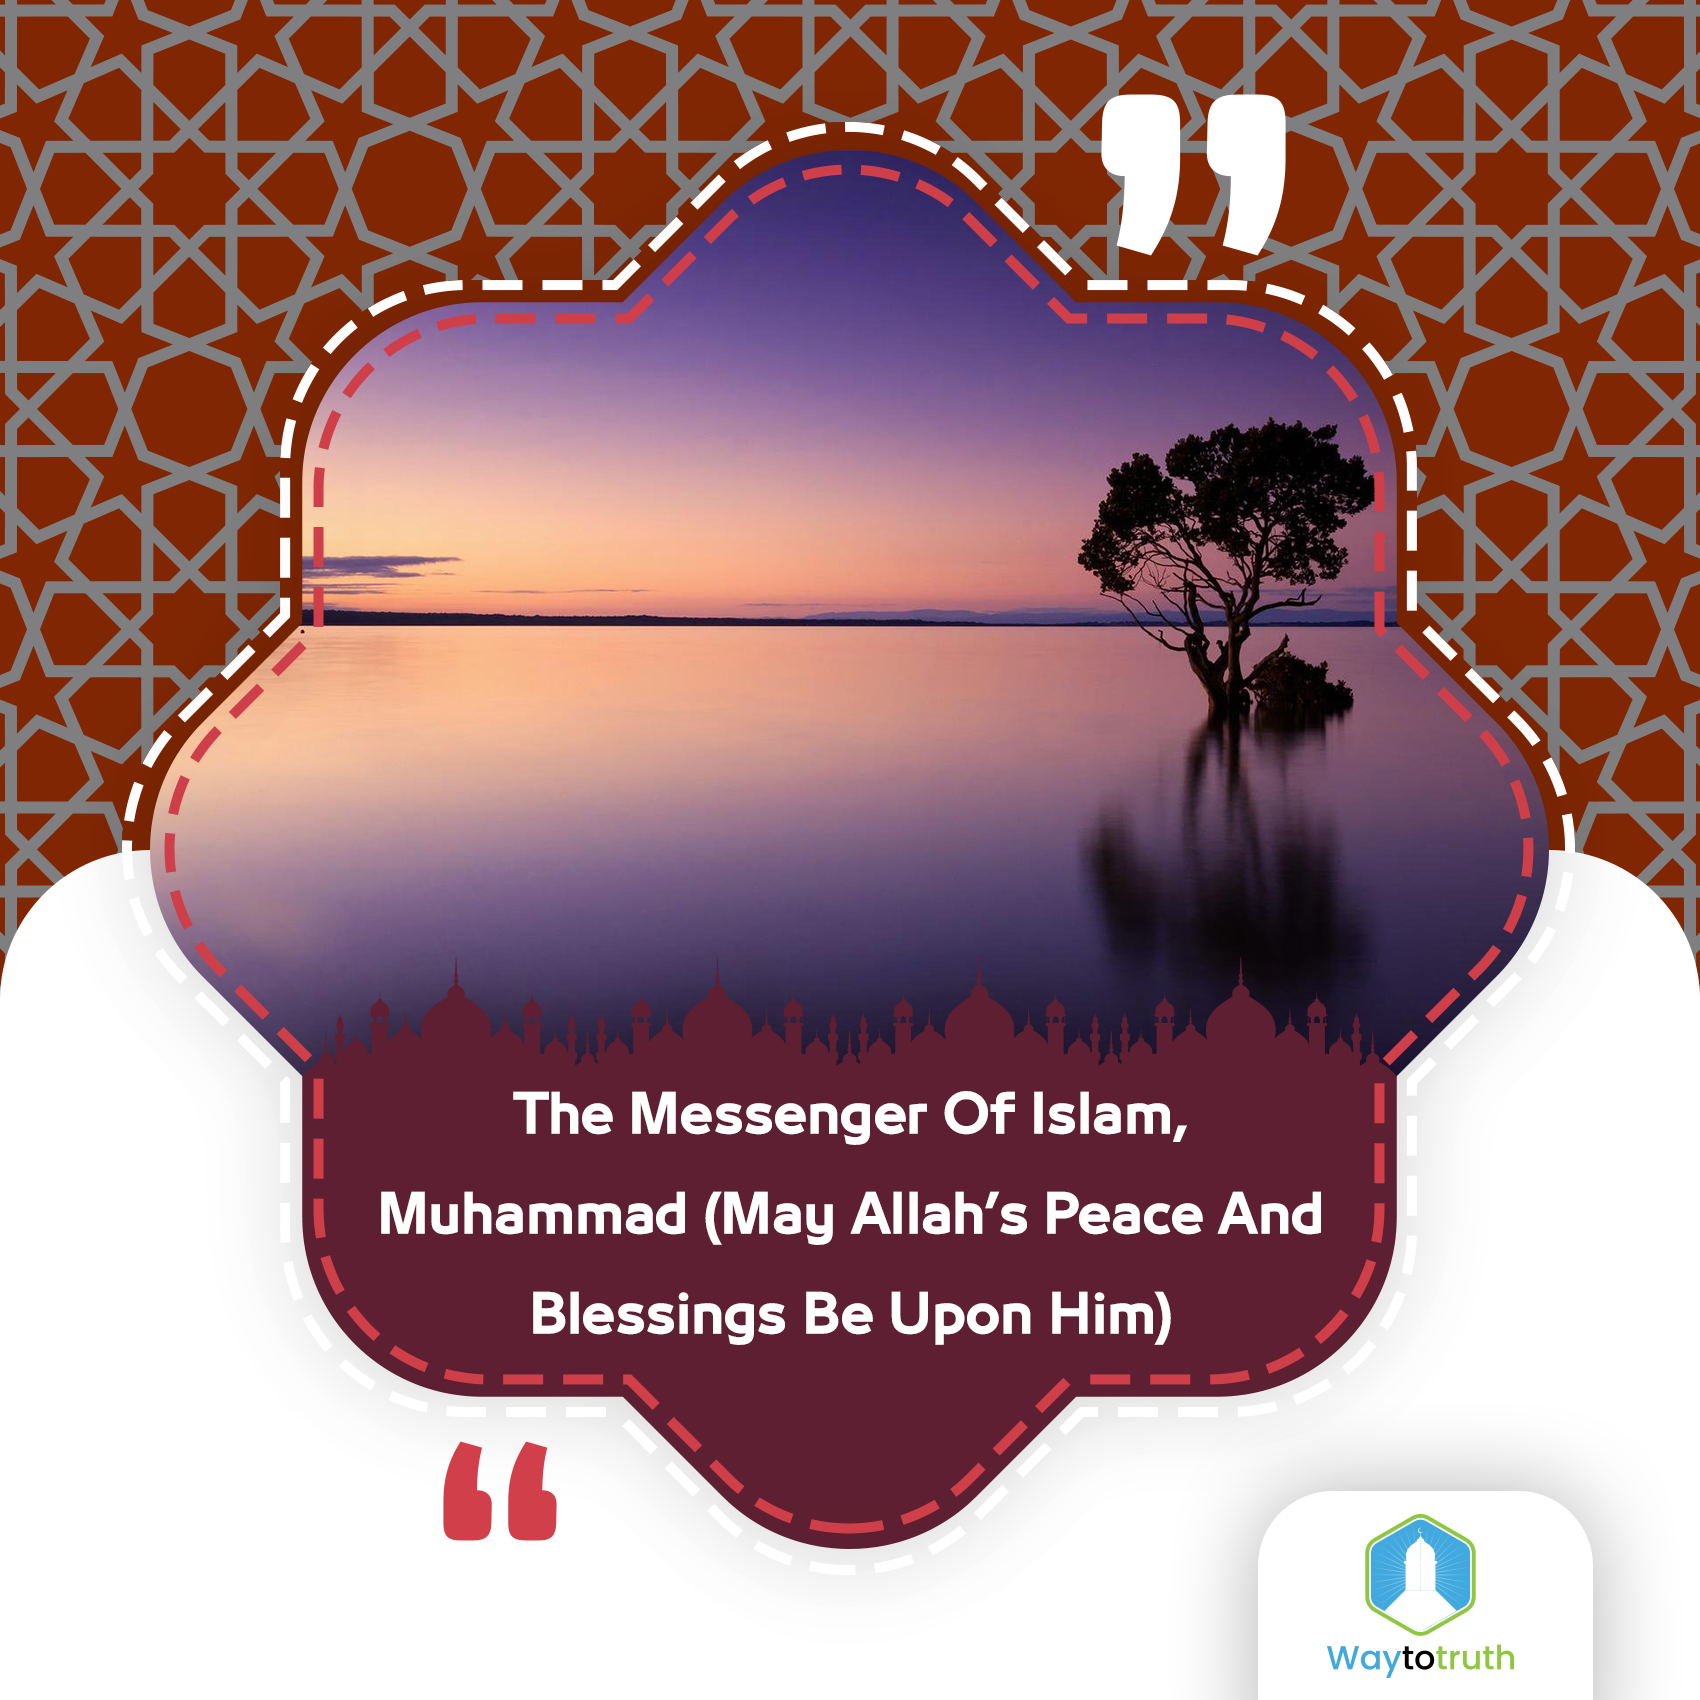 The Messenger of Islam, Muhammad (may Allah’s peace and blessings be upon him)